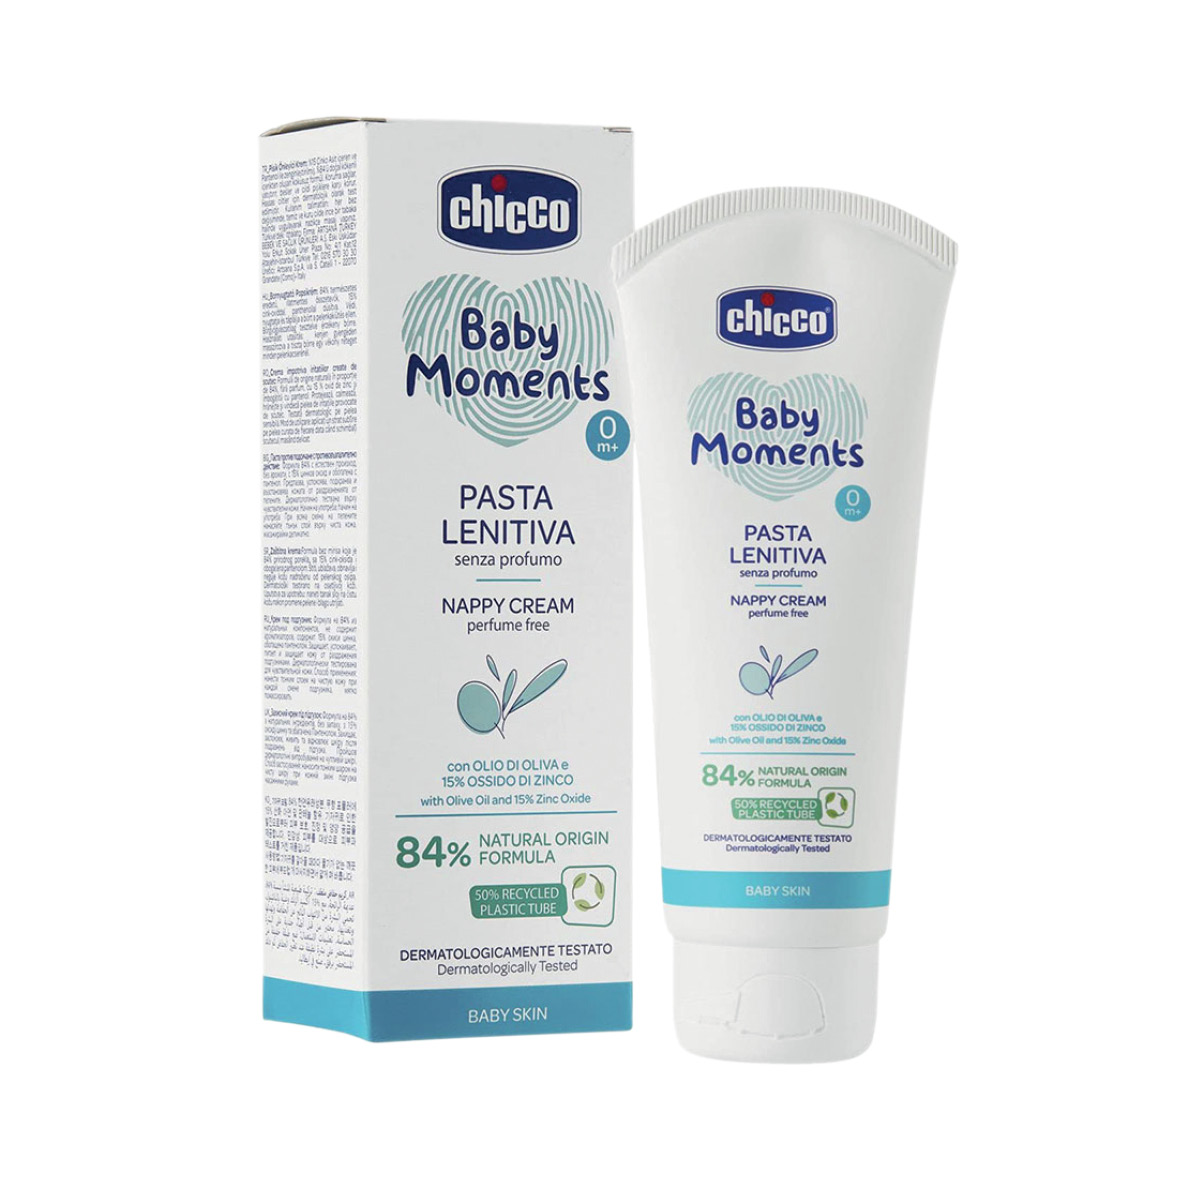 Chicco Baby Moments Nappy Cream 100ml - What's Instore